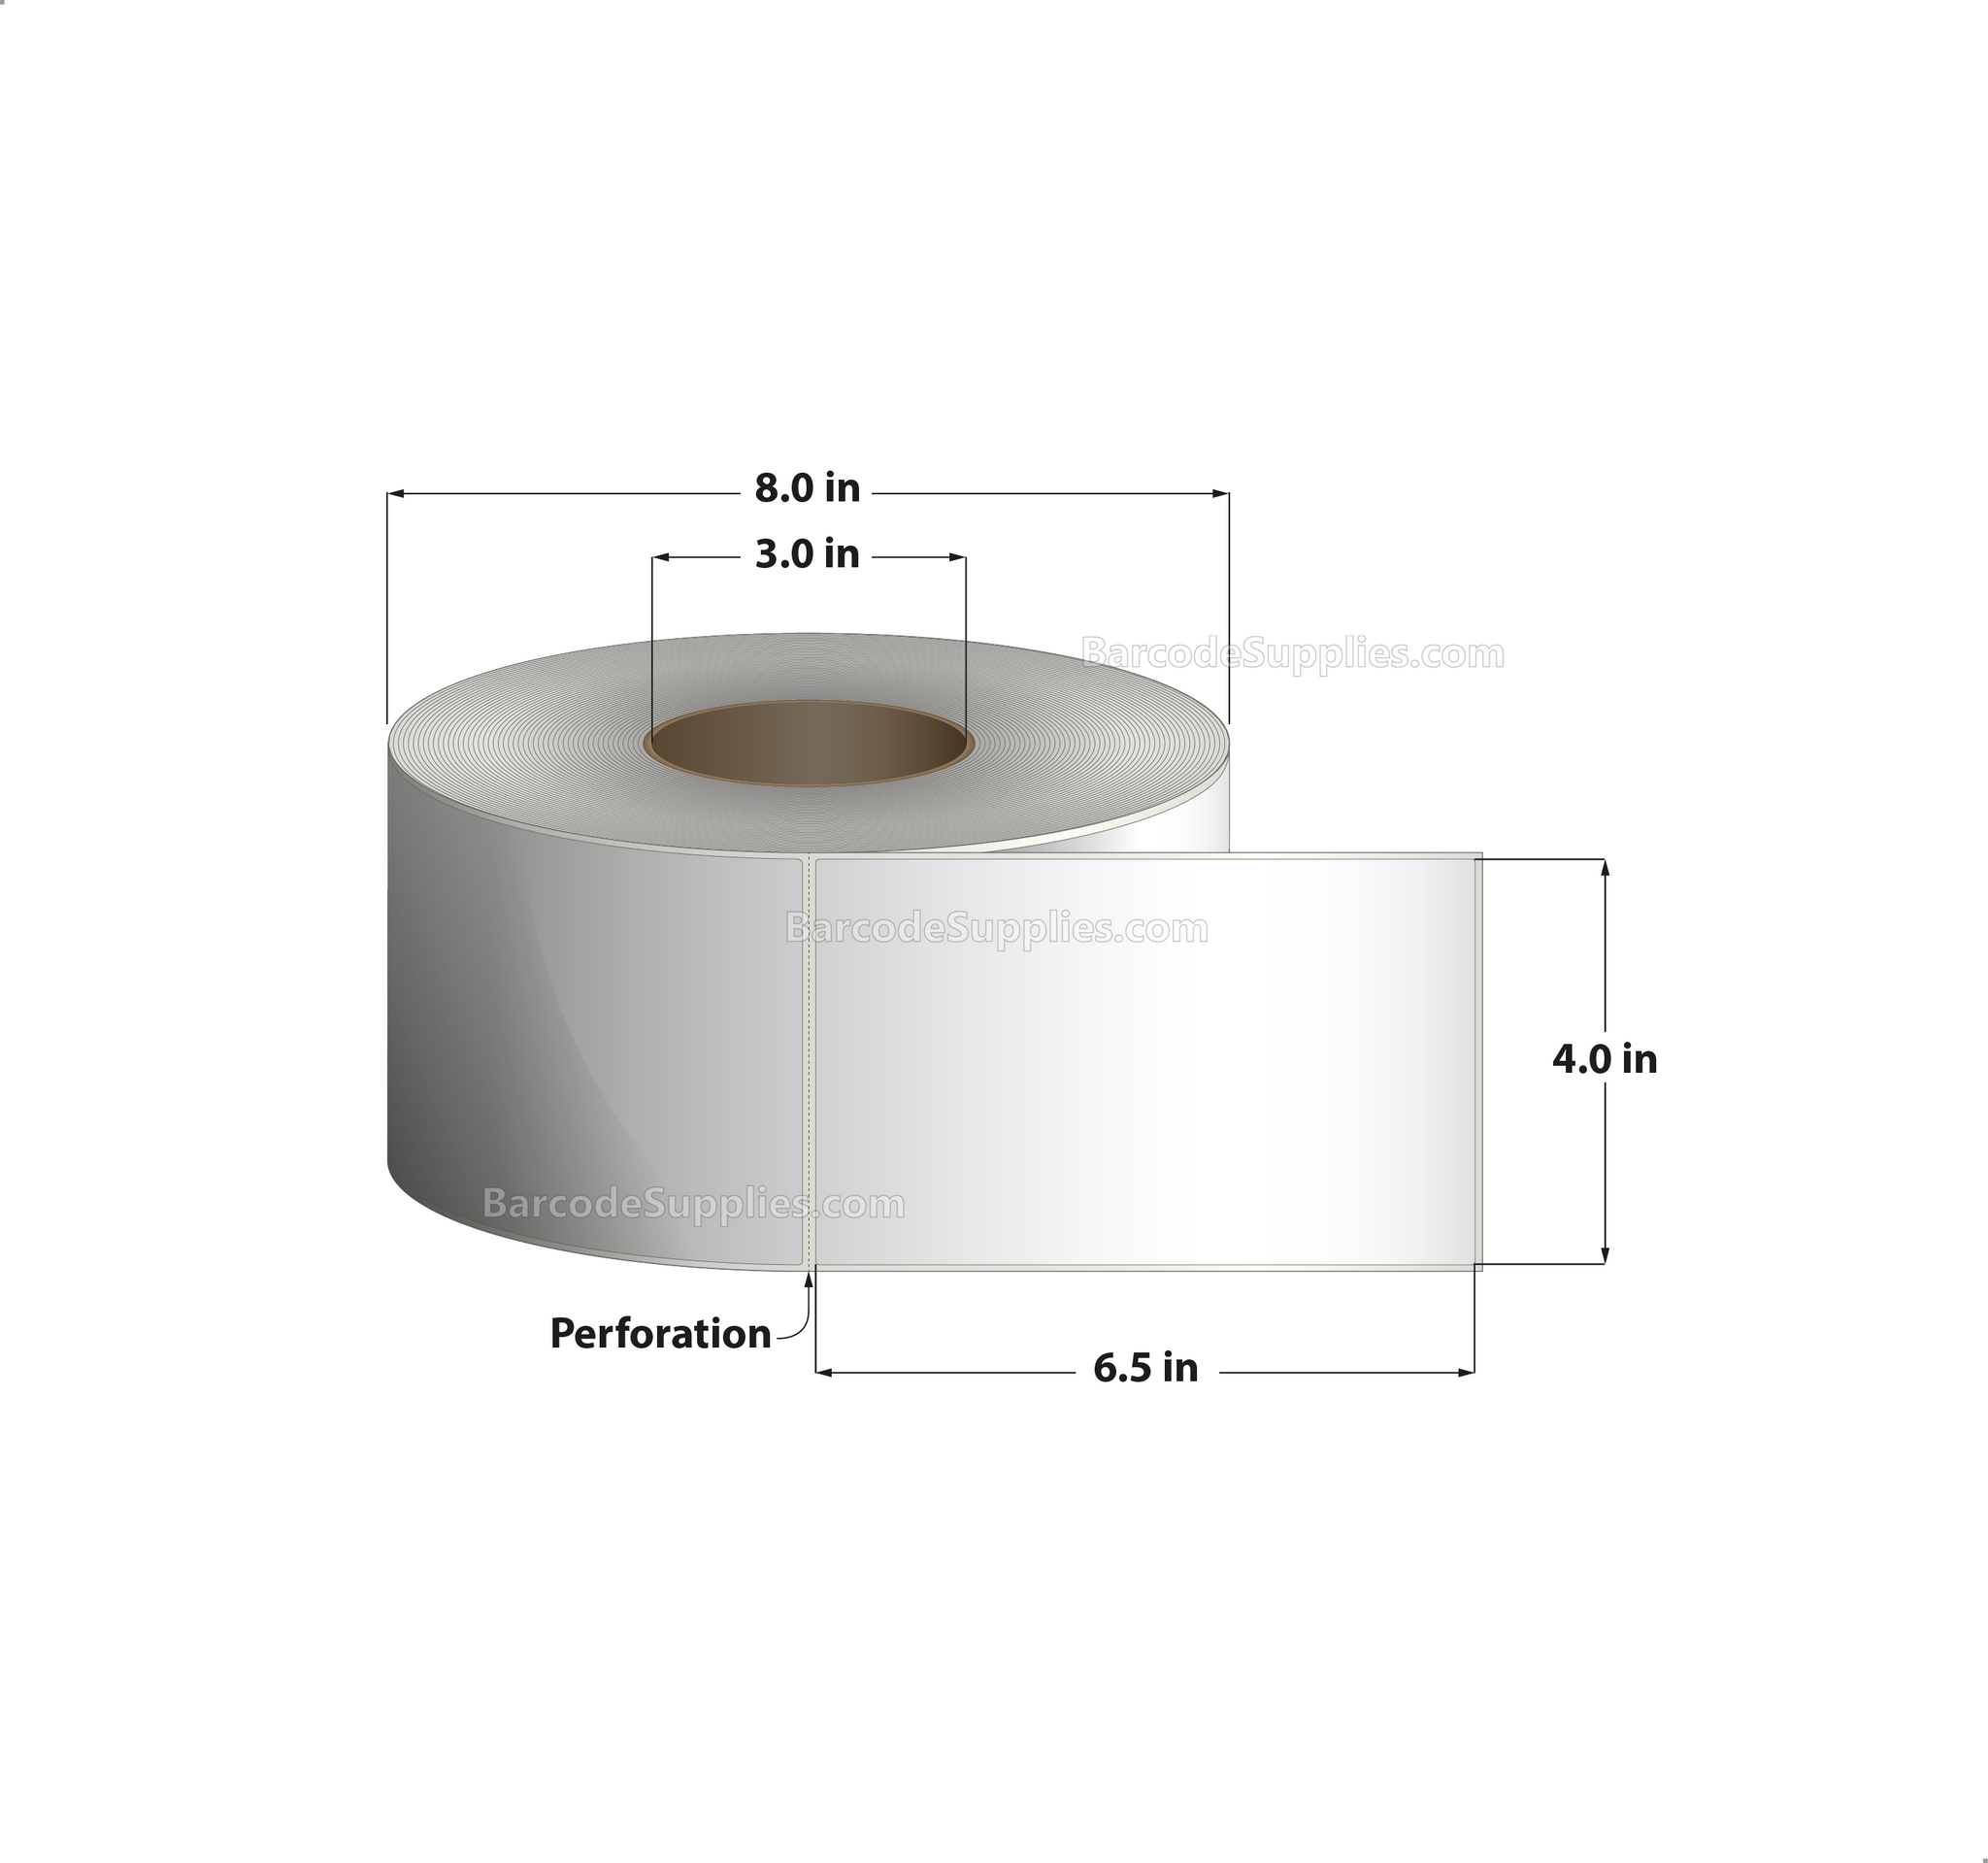 4 x 6.5 Thermal Transfer White Labels With Removable Adhesive - Perforated - 900 Labels Per Roll - Carton Of 4 Rolls - 3600 Labels Total - MPN: TH465-1PREM